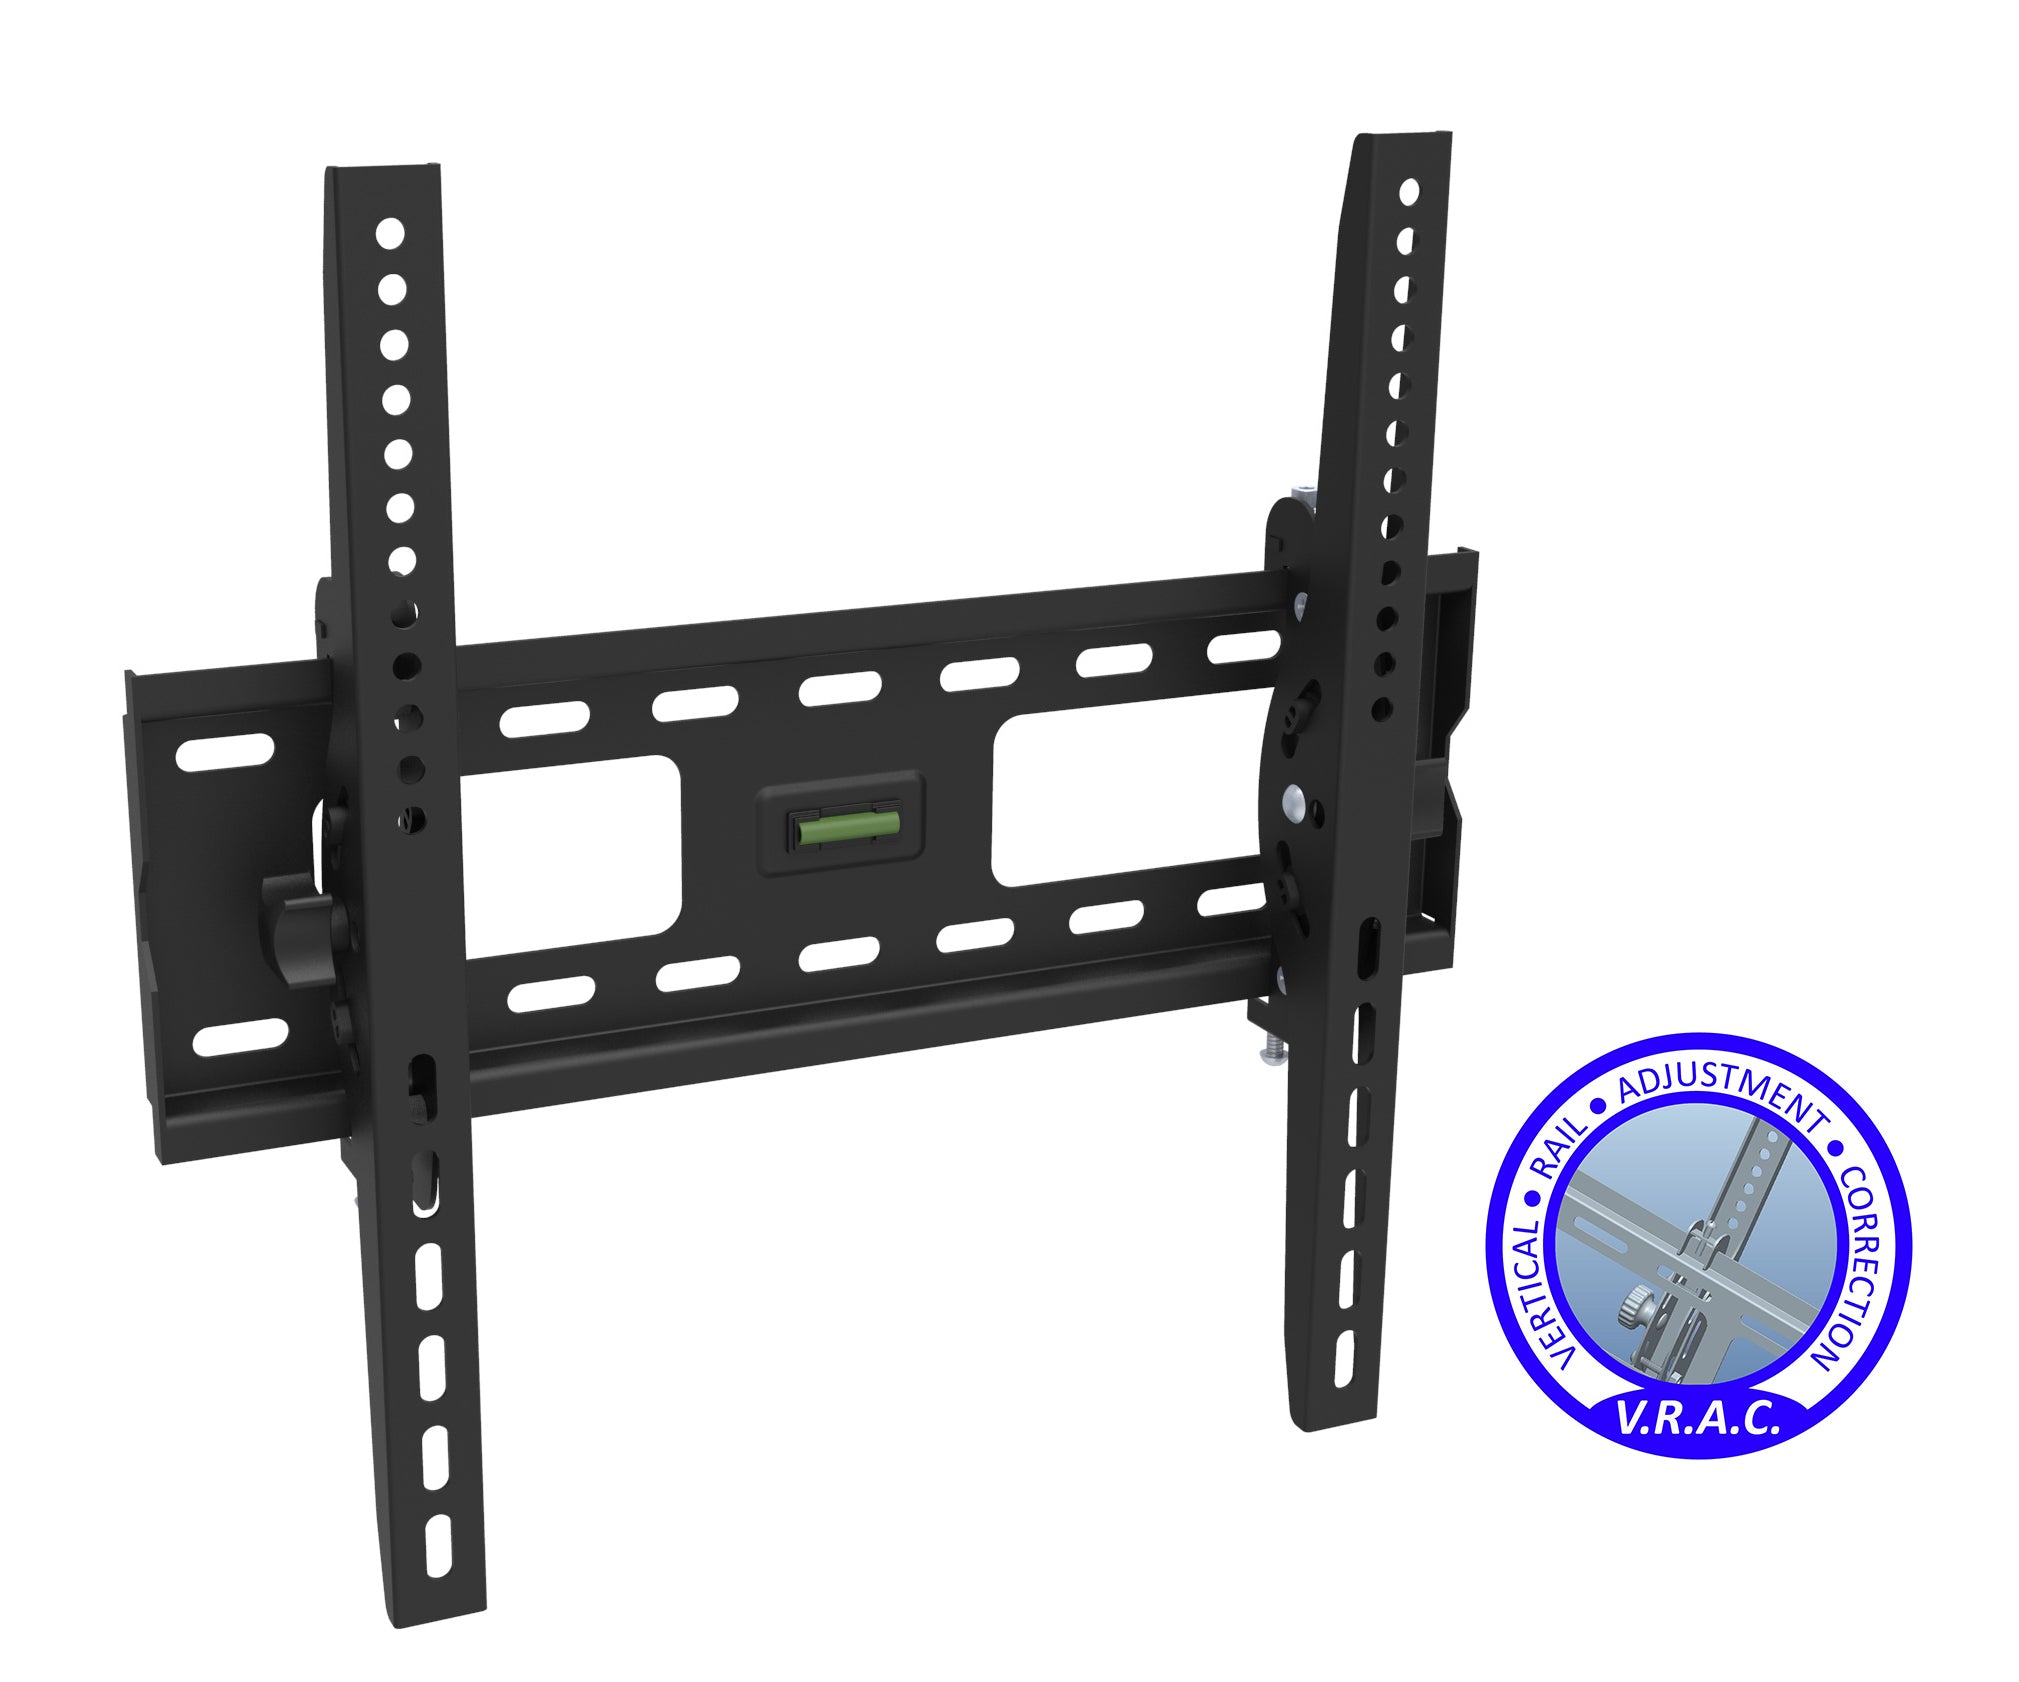 Direct Connect, DCT3255V-RAC DirectConnect™ Flat LCD/PDP Tilting Wall Mount 10° FOR 32"-55" Black 400X400 VESA With Vertical Rail Arm Correction Level Included 165LBS MAX 2.48" Profile NU